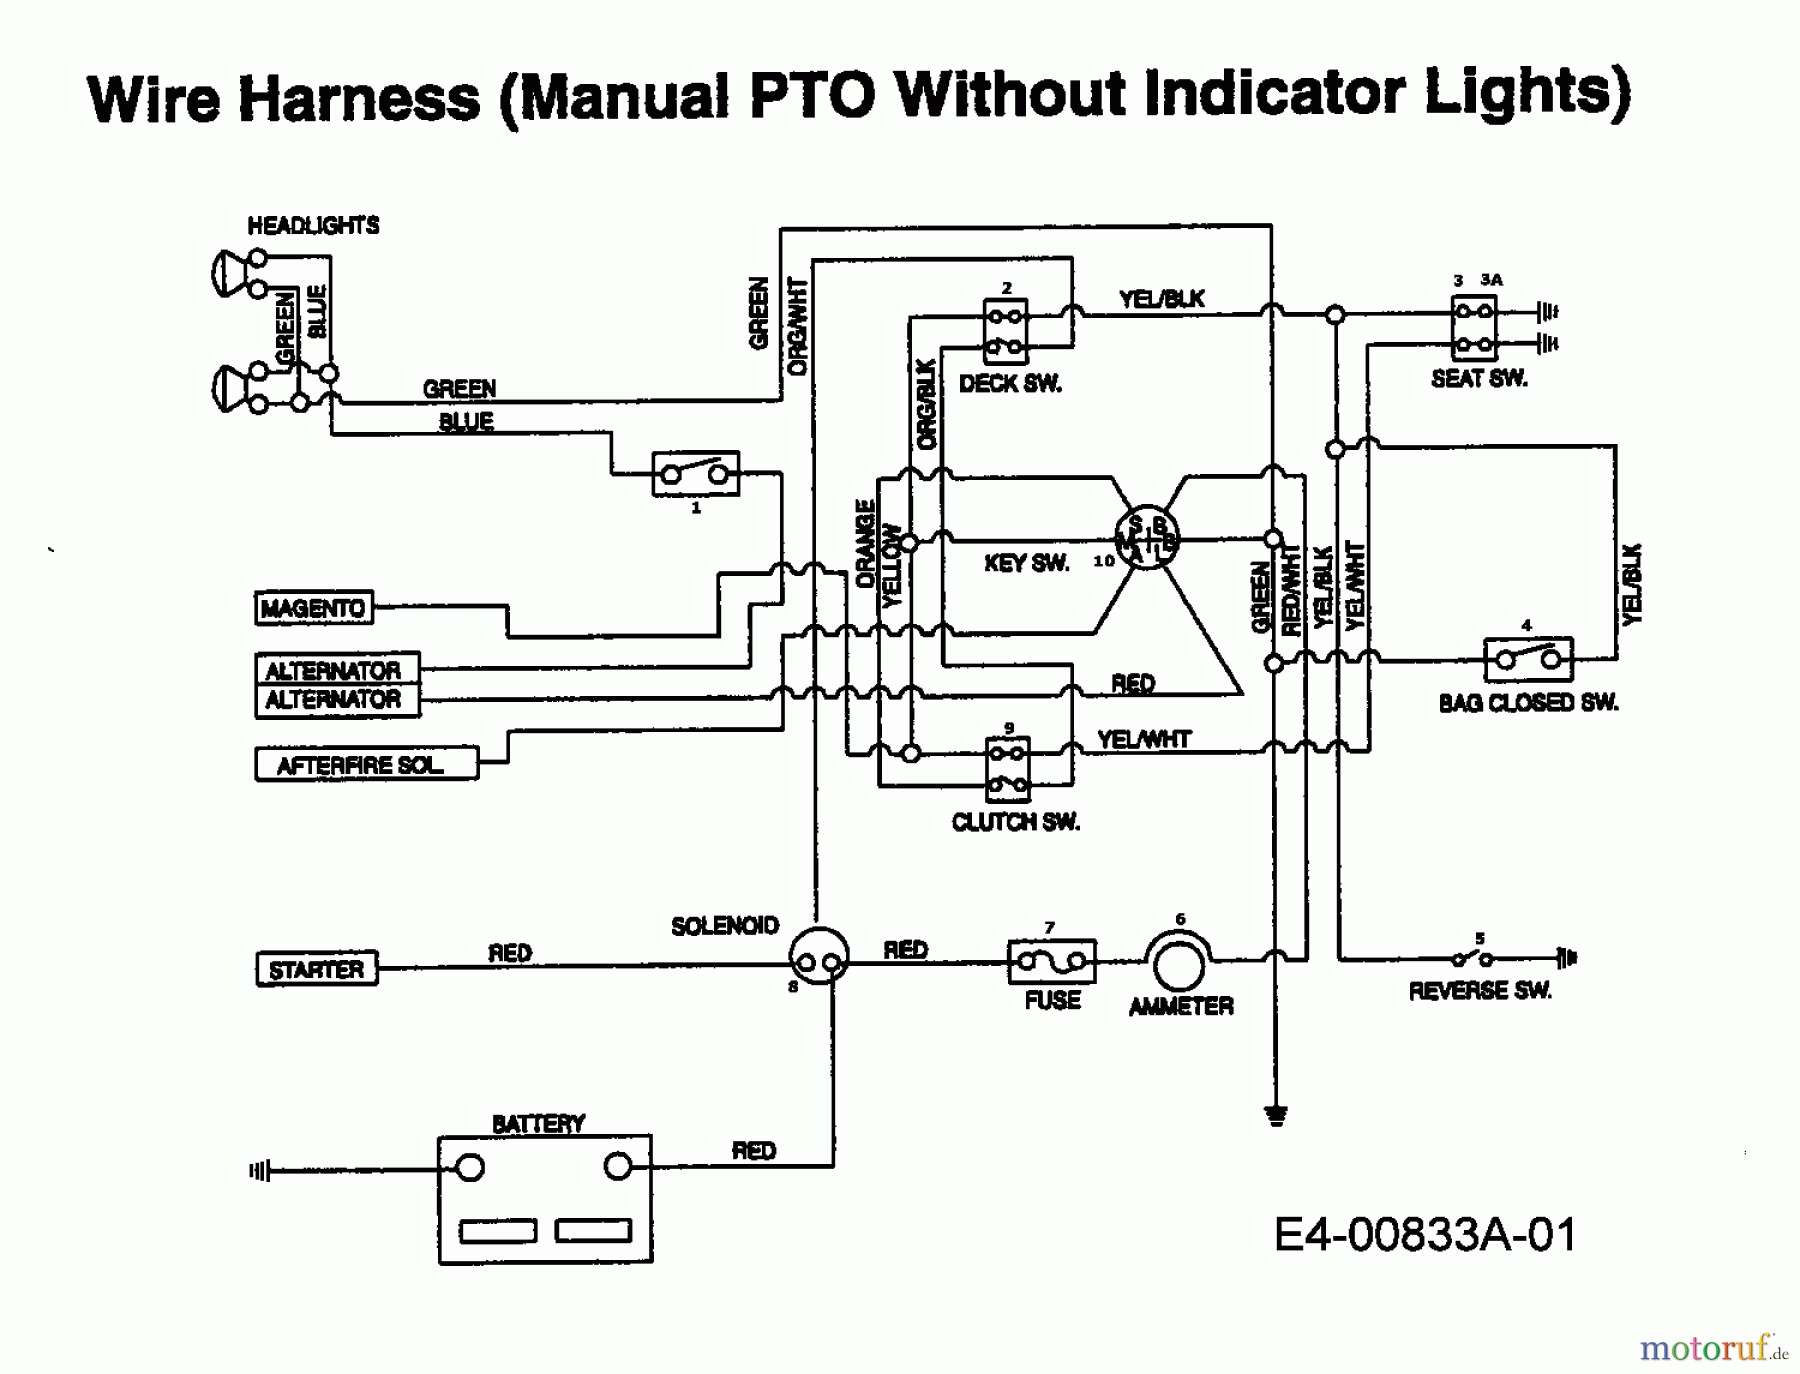  MTD Lawn tractors EH/165 13CO798N678  (1999) Wiring diagram without indicator lights